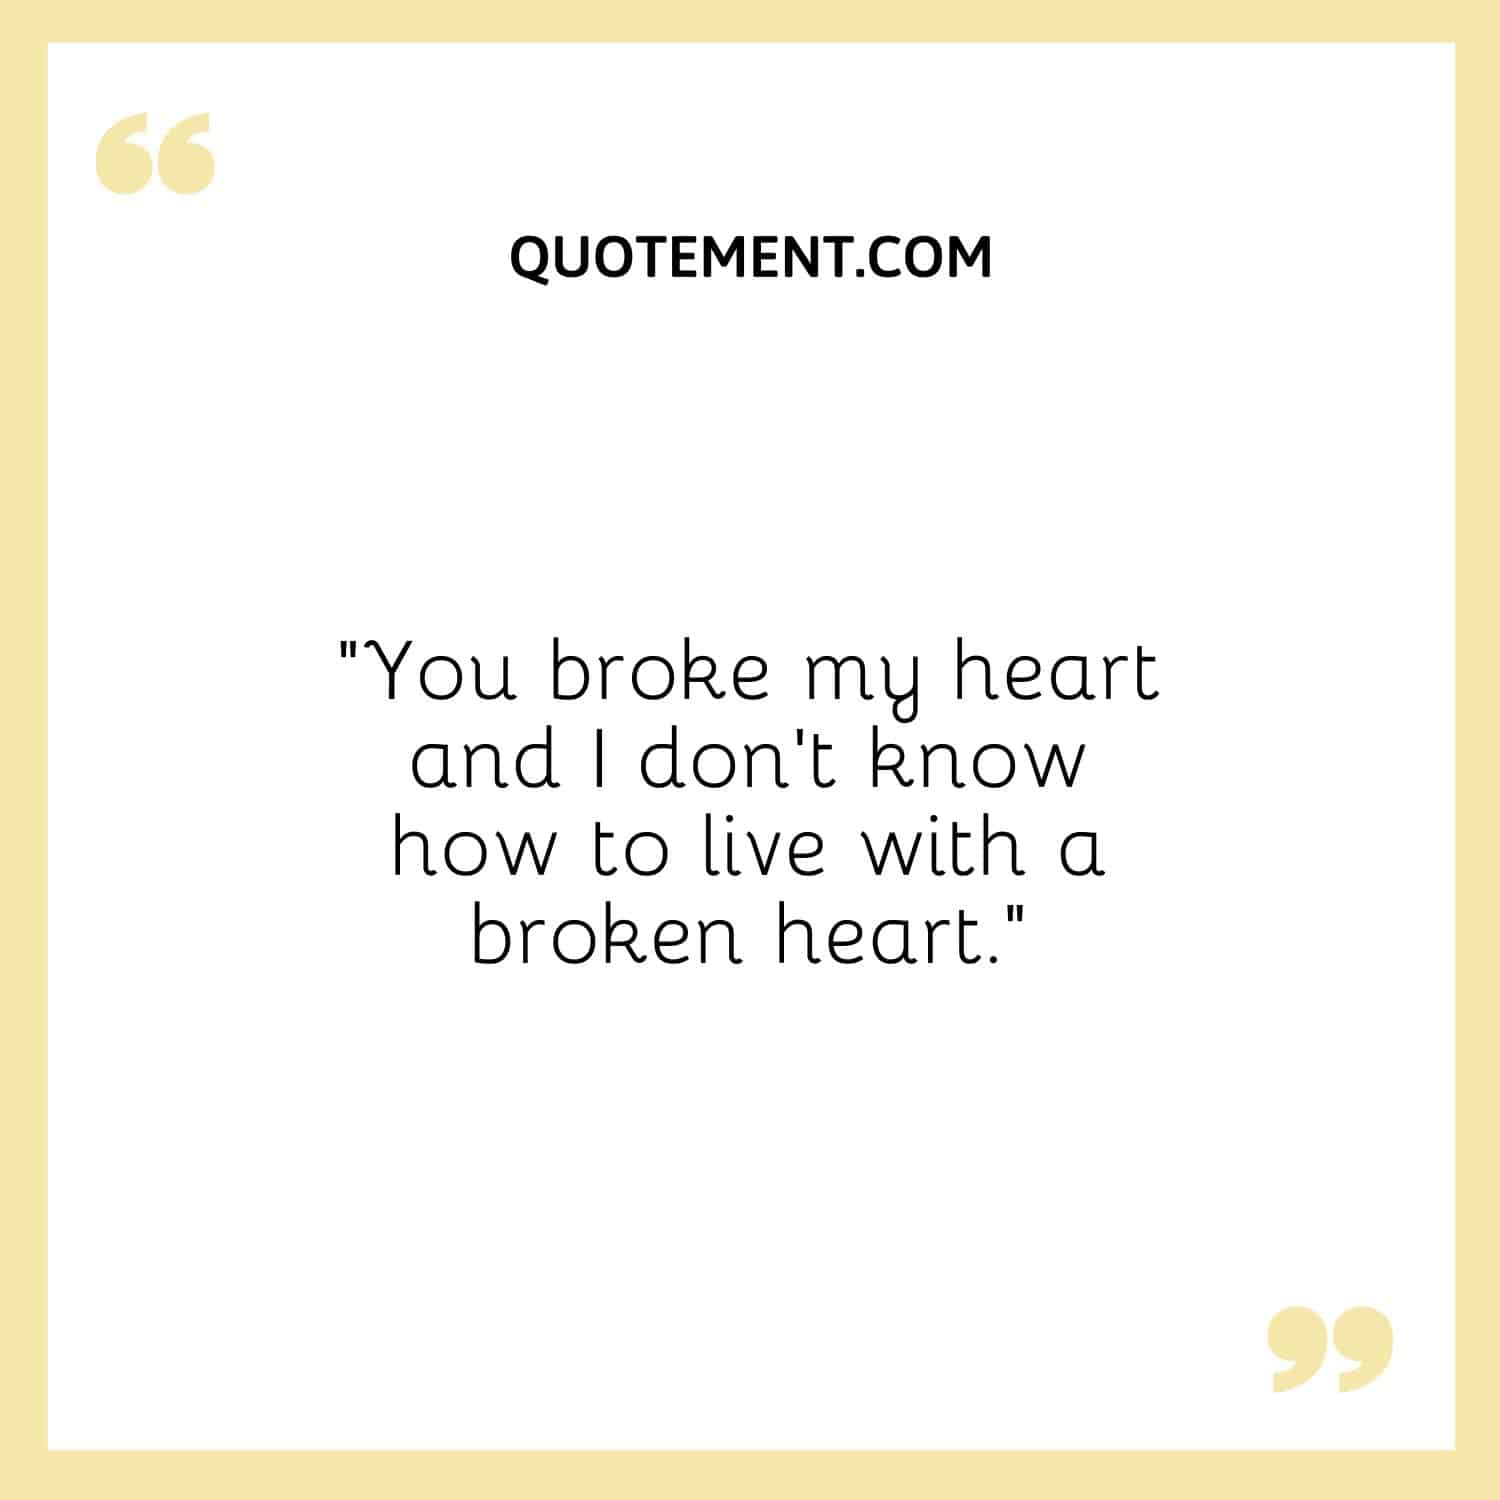 You broke my heart and I don't know how to live with a broken heart